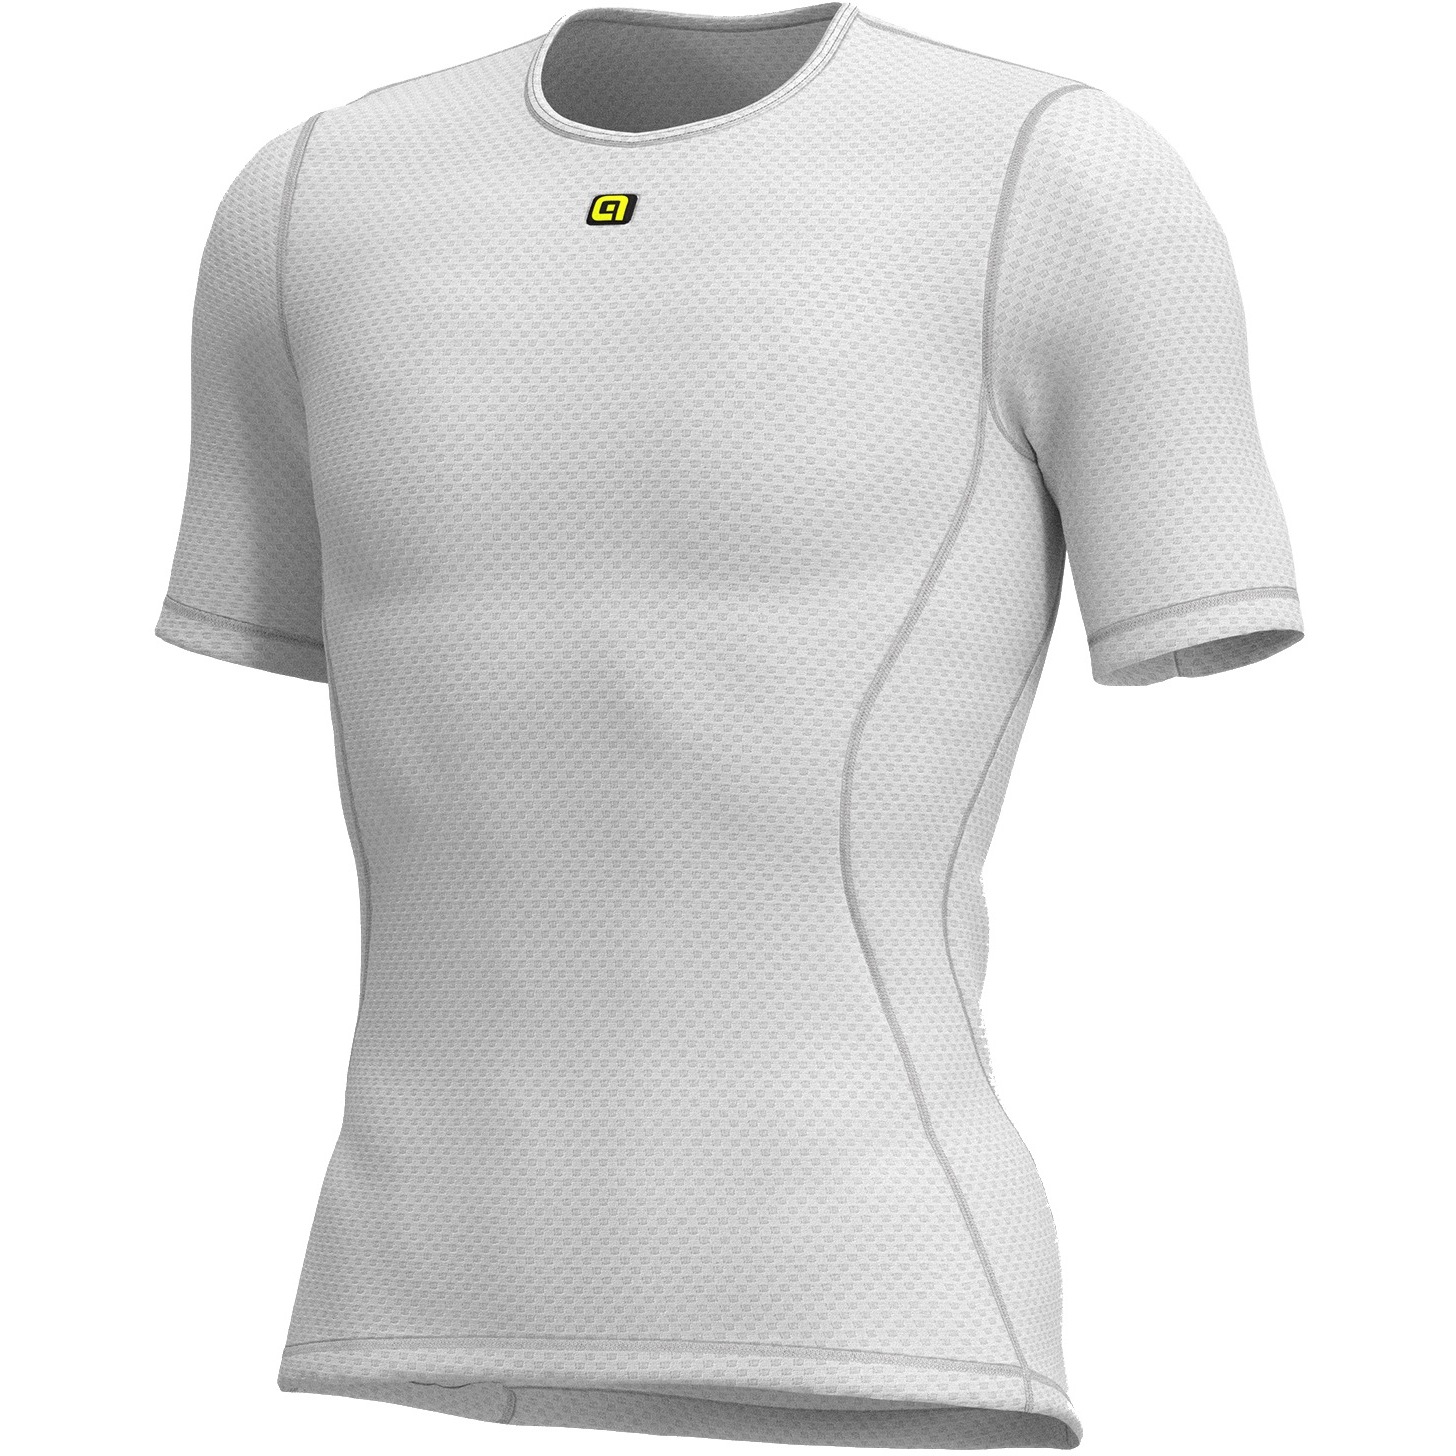 Picture of Alé Velo Active Short Sleeve Undershirt - white